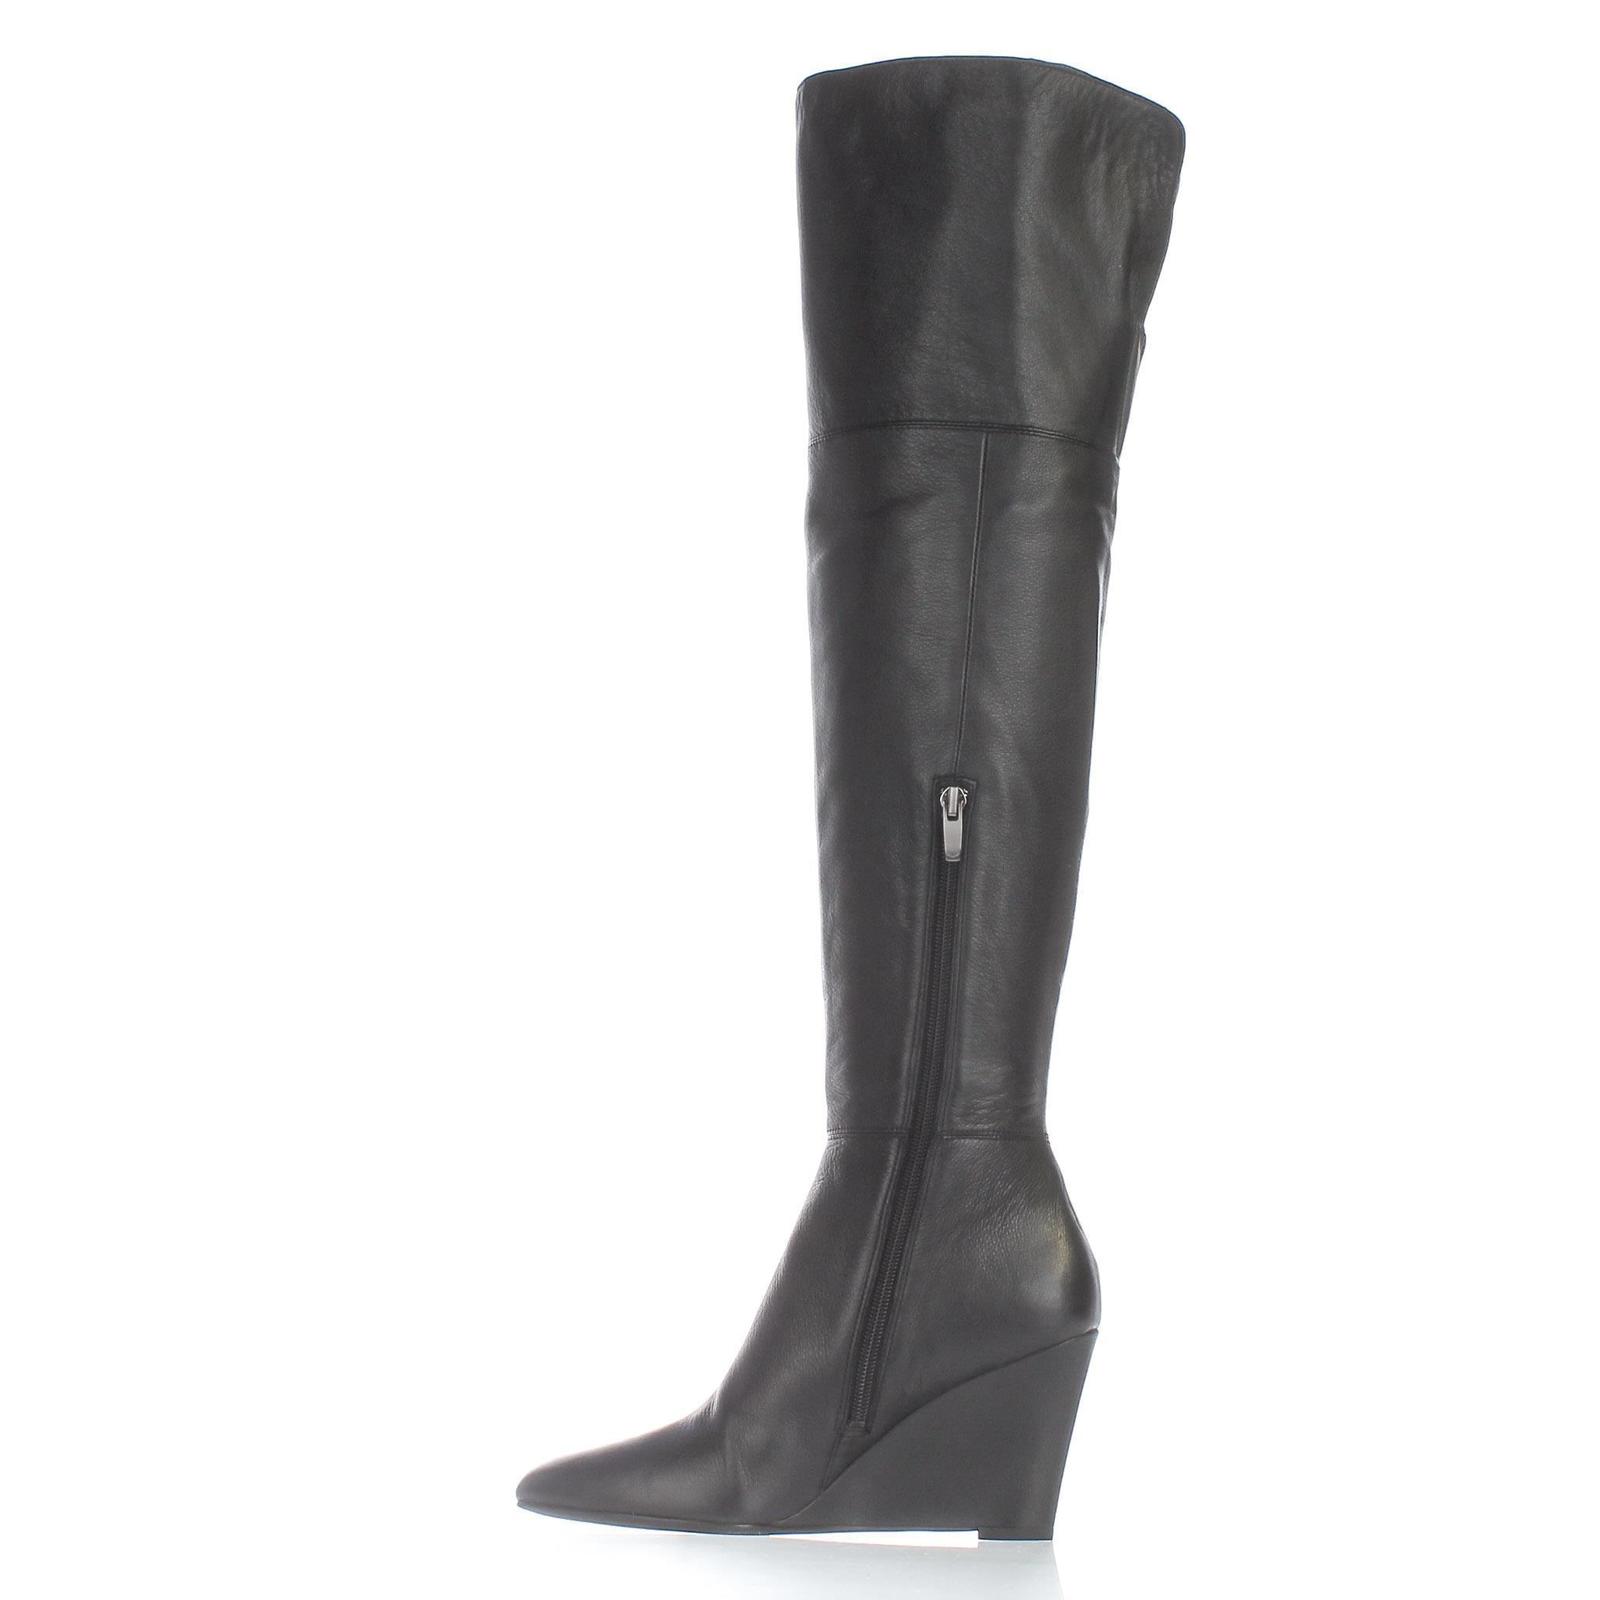 Via Spiga Kennedy Over-The-Knee Wedge Boots, Black - Boots